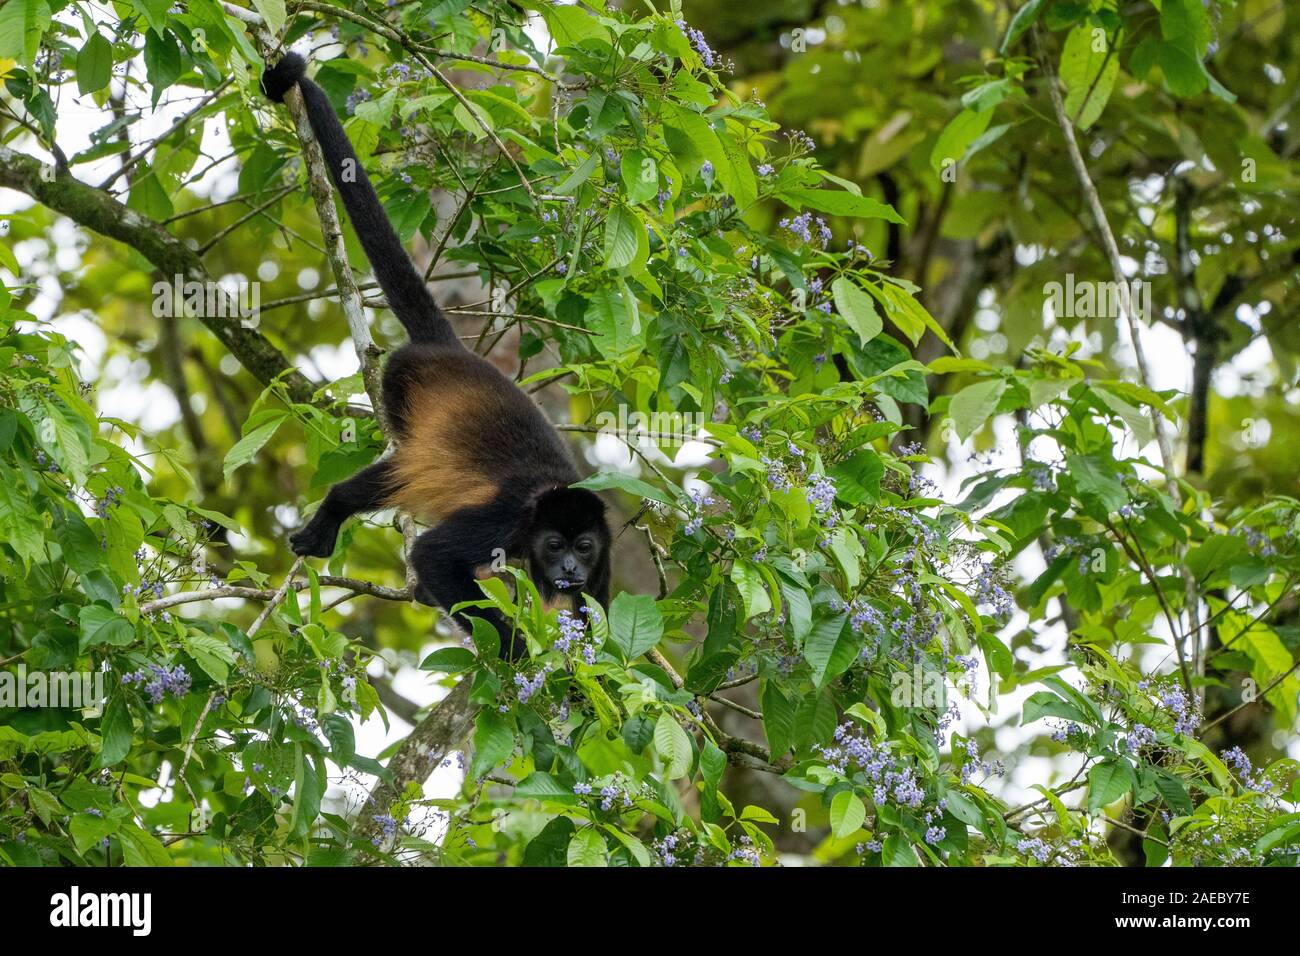 Mantled howler monkey. Wild mantled howler monkey (Alouatta palliata palliata) swinging from a branch in the Costa Rican rainforest. Stock Photo